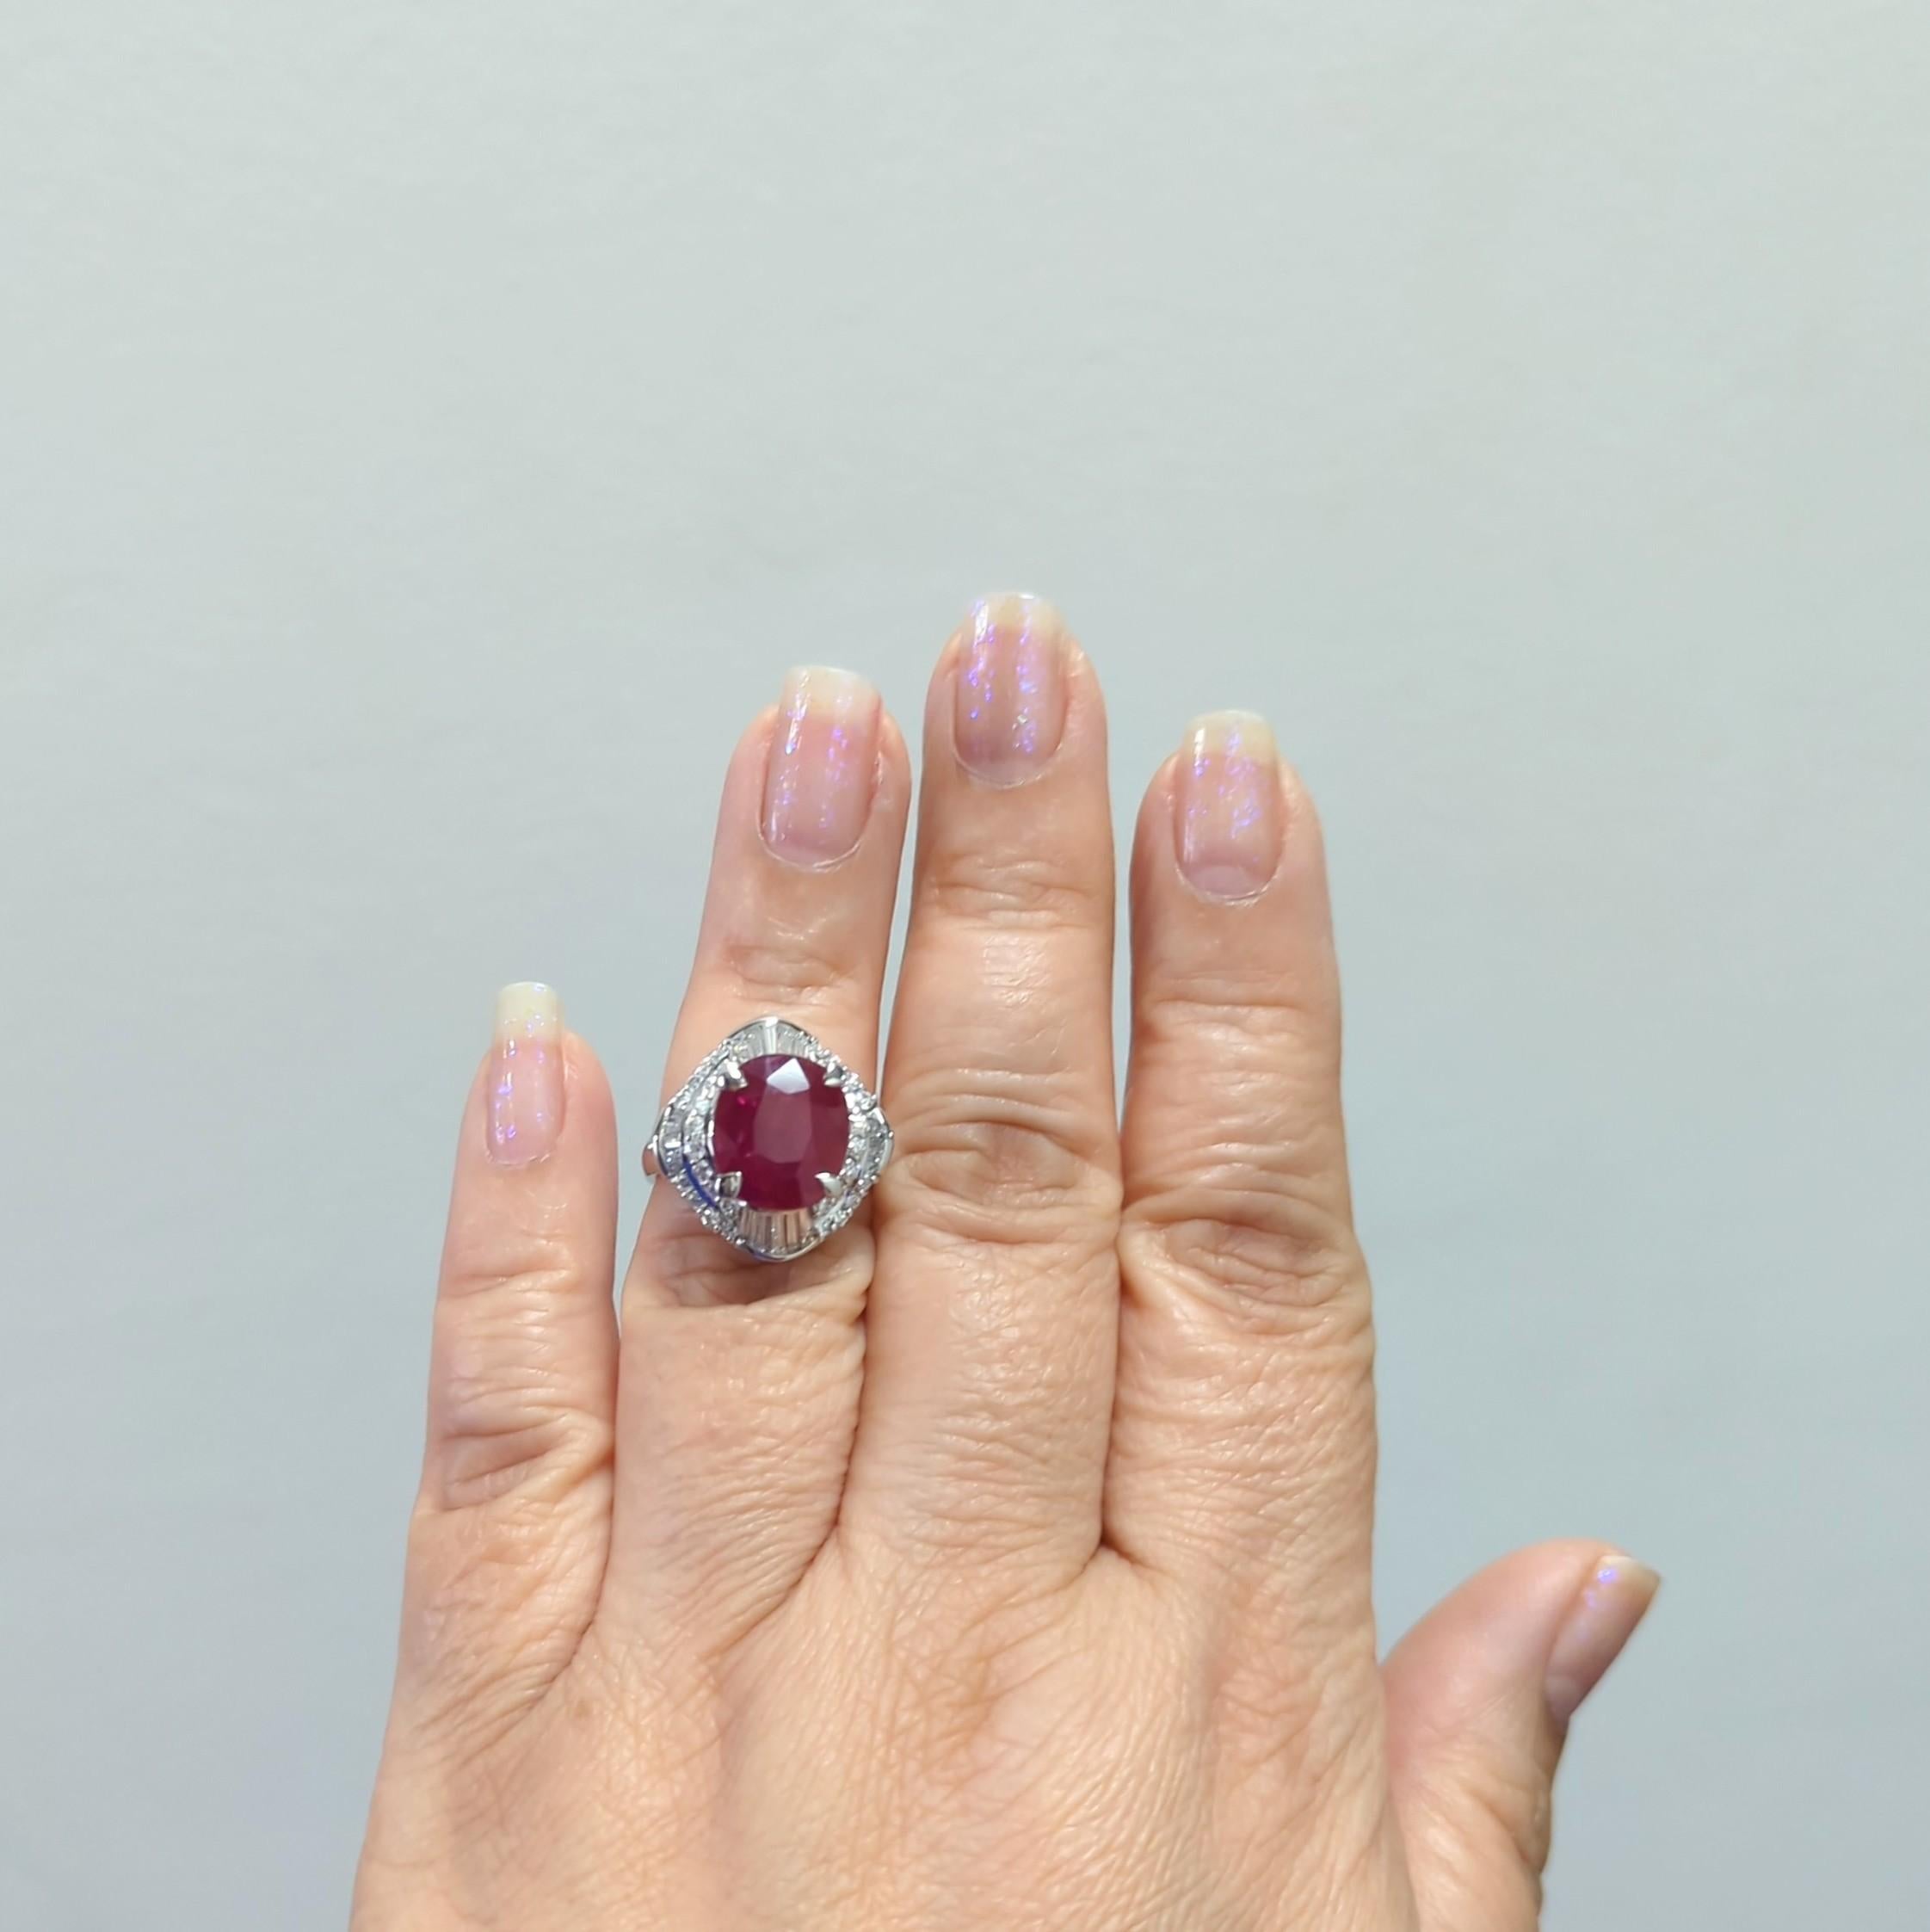 Gorgeous deep red unheated 5.20 ct. Mozambique ruby oval with 1.37 ct. good quality, white, and bright diamond baguettes and rounds.  Handmade in platinum.  Ring size 6+.  GIA certificate included.